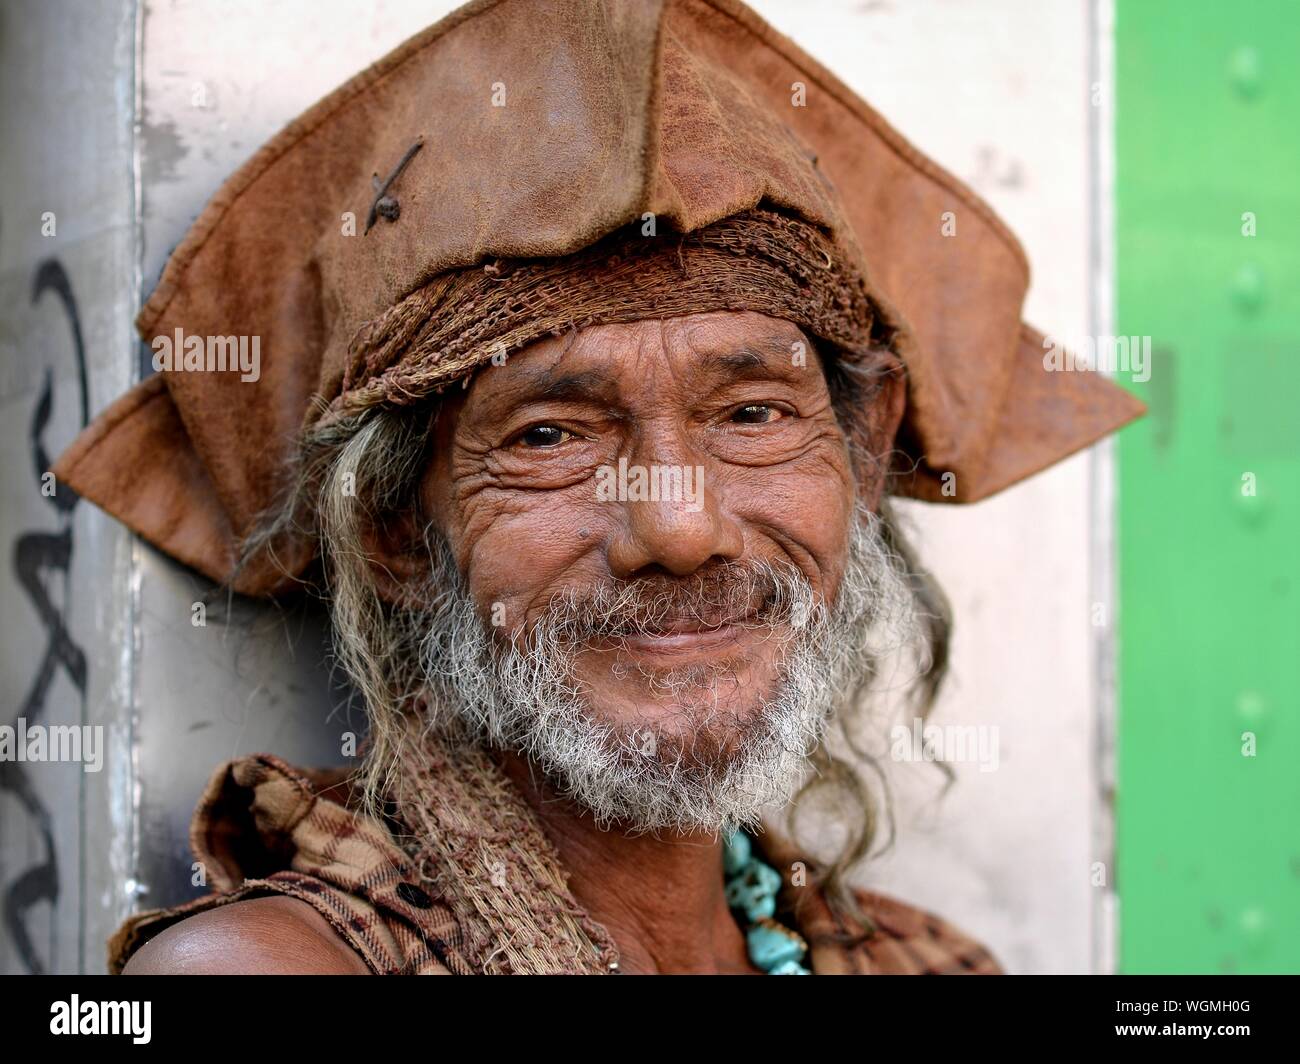 Rugged elderly man wears a worn brown Jack Sparrow tricorn hat and smiles for the camera. Stock Photo